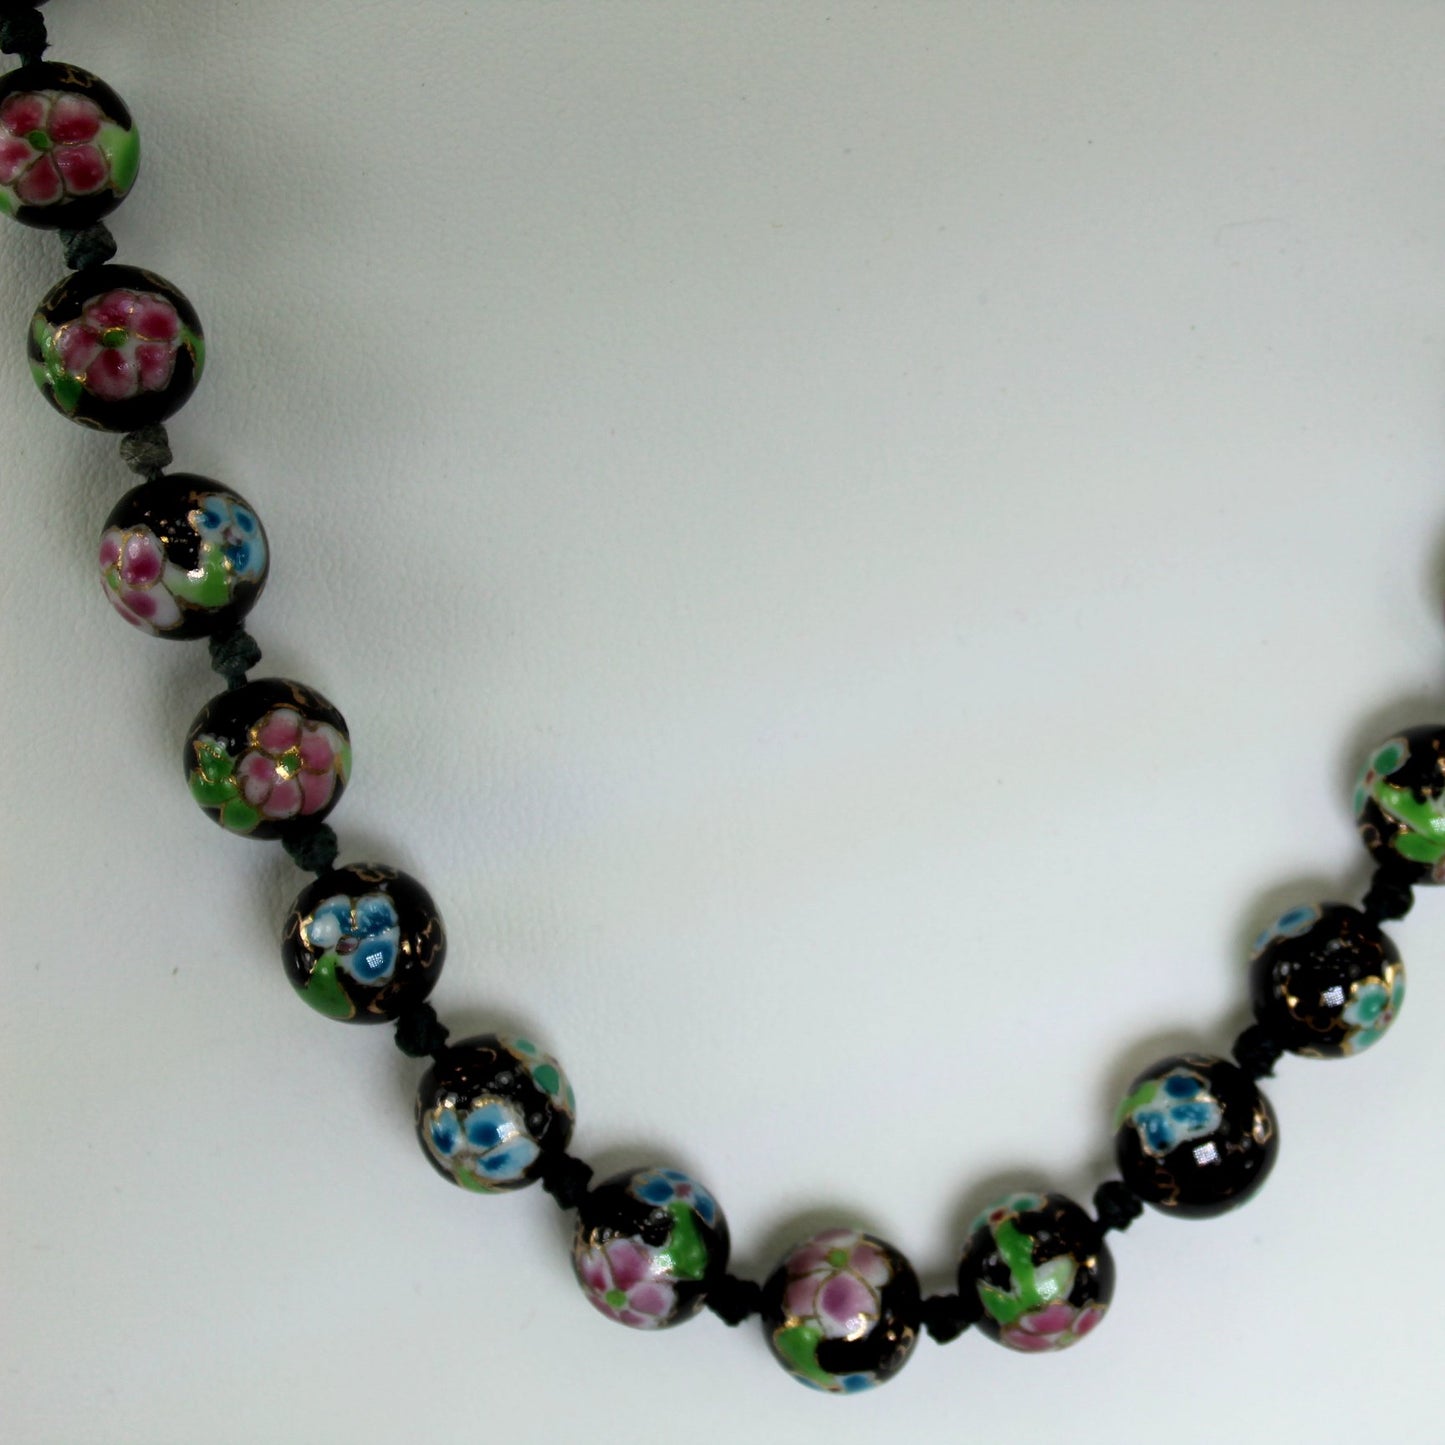 Older Cloisonne Hand Knotted Necklace 42 Beads 11mm Black Pink Blue closeup of beads